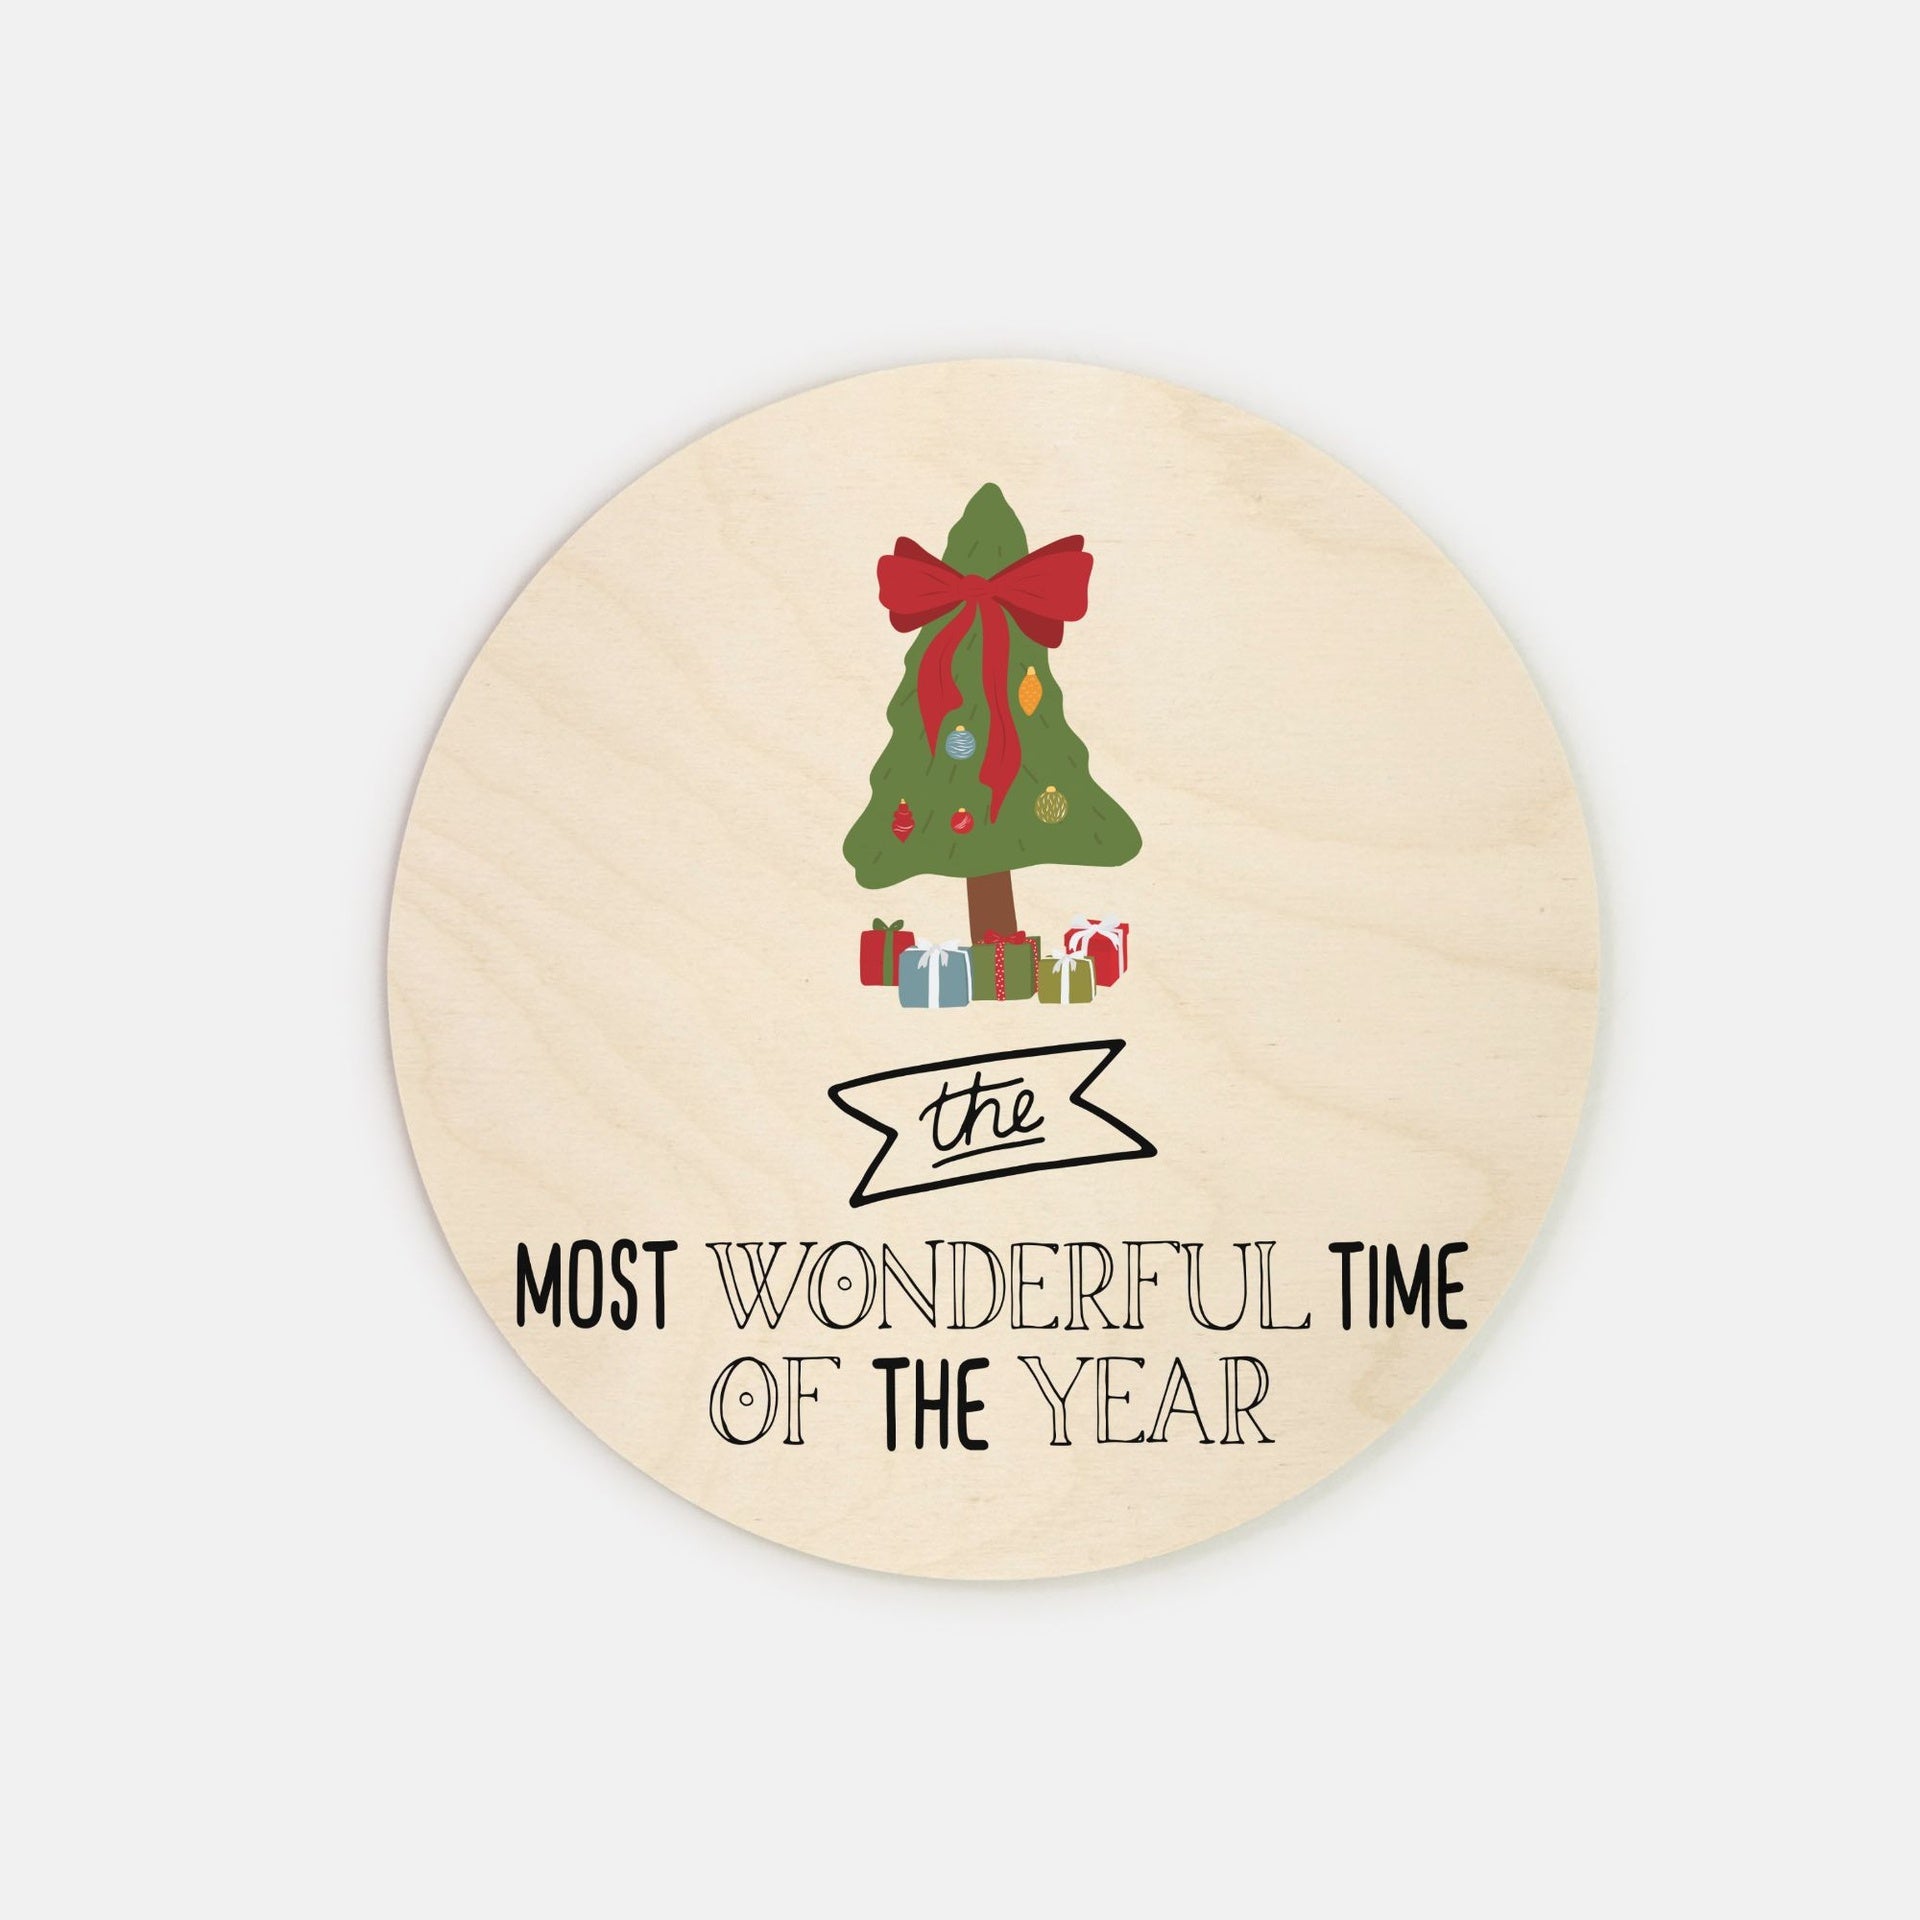 8" Round Wood Sign - Most Wonderful Time